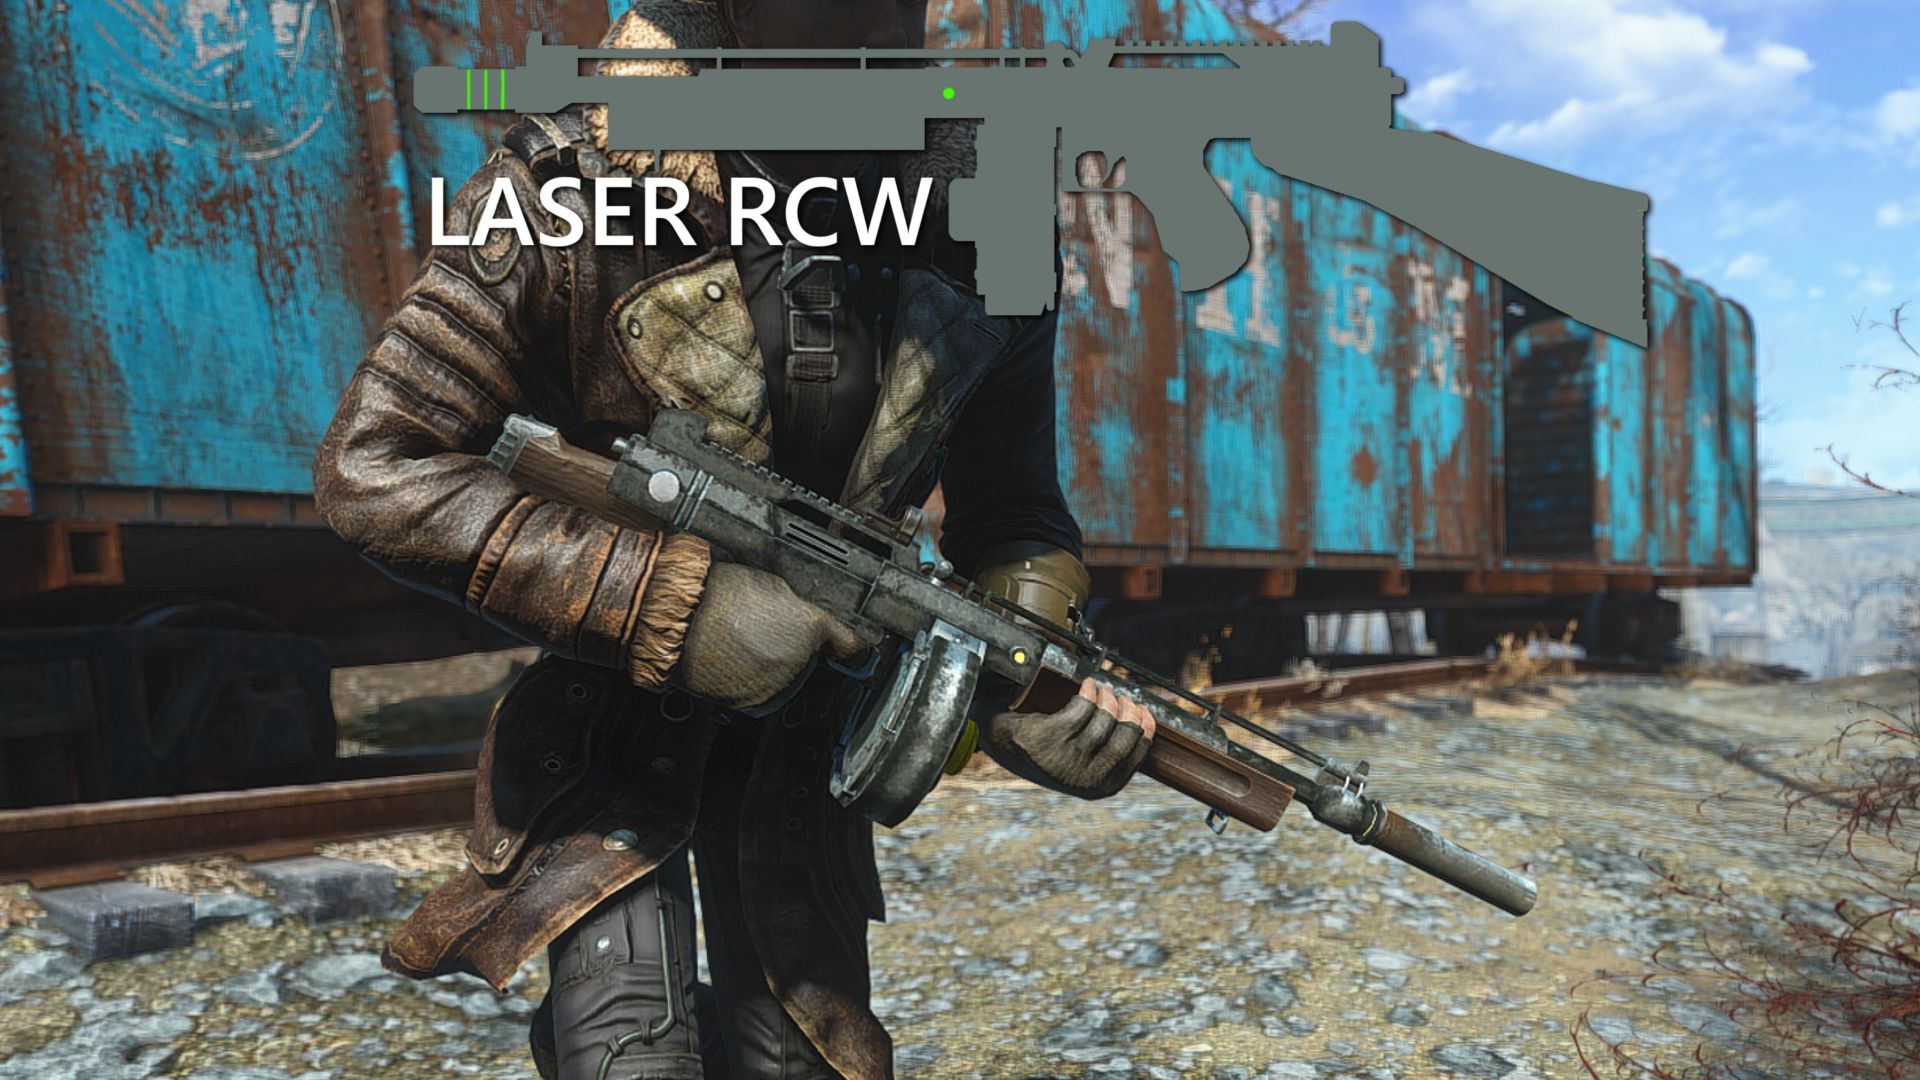 The Laser Rcw An Energy Submachine Gun From New Vegas From Scratch 日本語化対応 武器 Fallout4 Mod データベース Mod紹介 まとめサイト